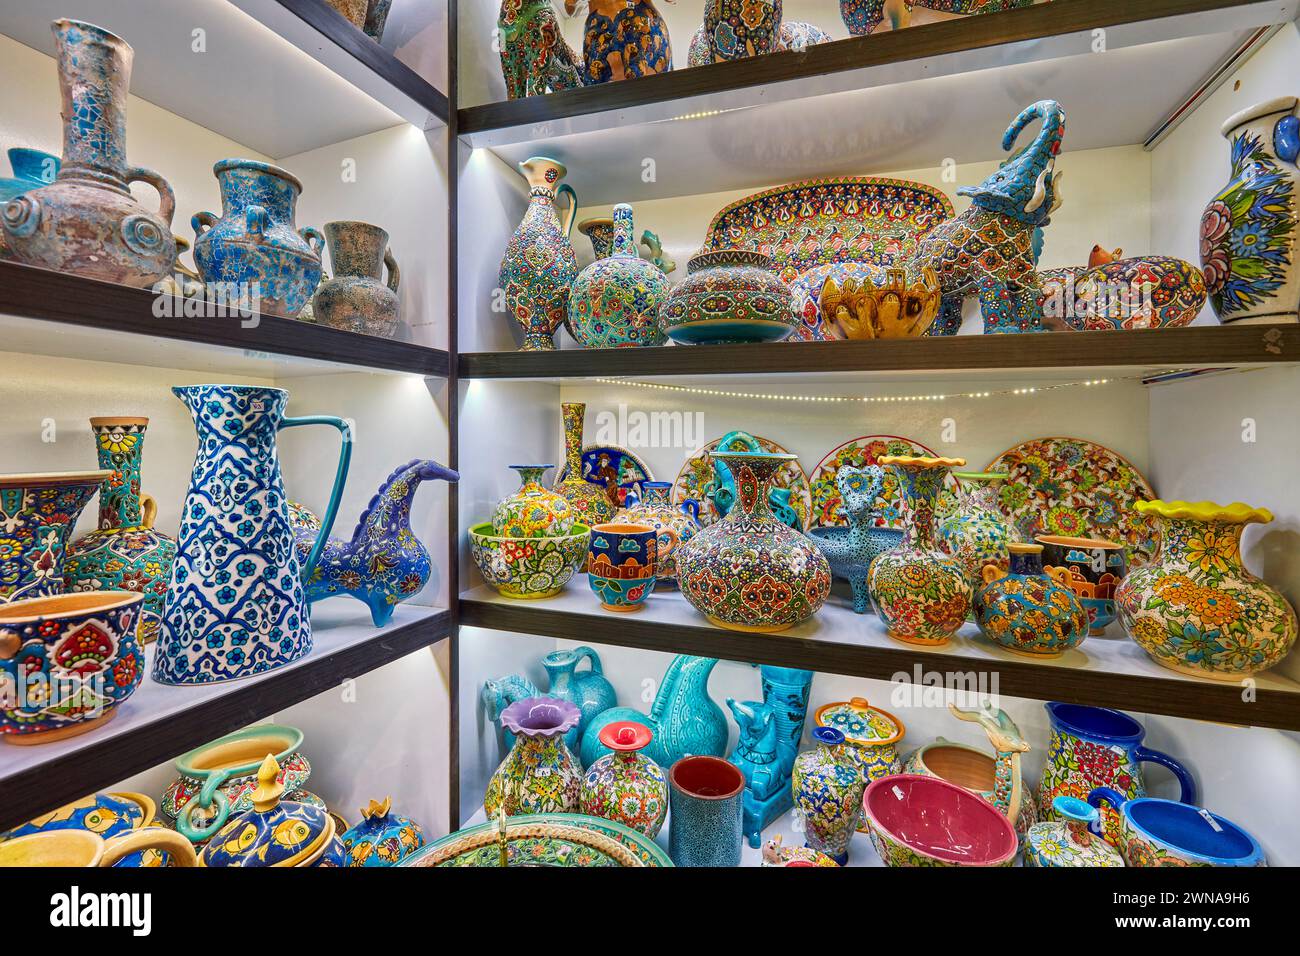 A selection of traditional handmade pottery and ceramics displayed in a gift shop in the historical Fahadan Neighborhood of Yazd, Iran. Stock Photo